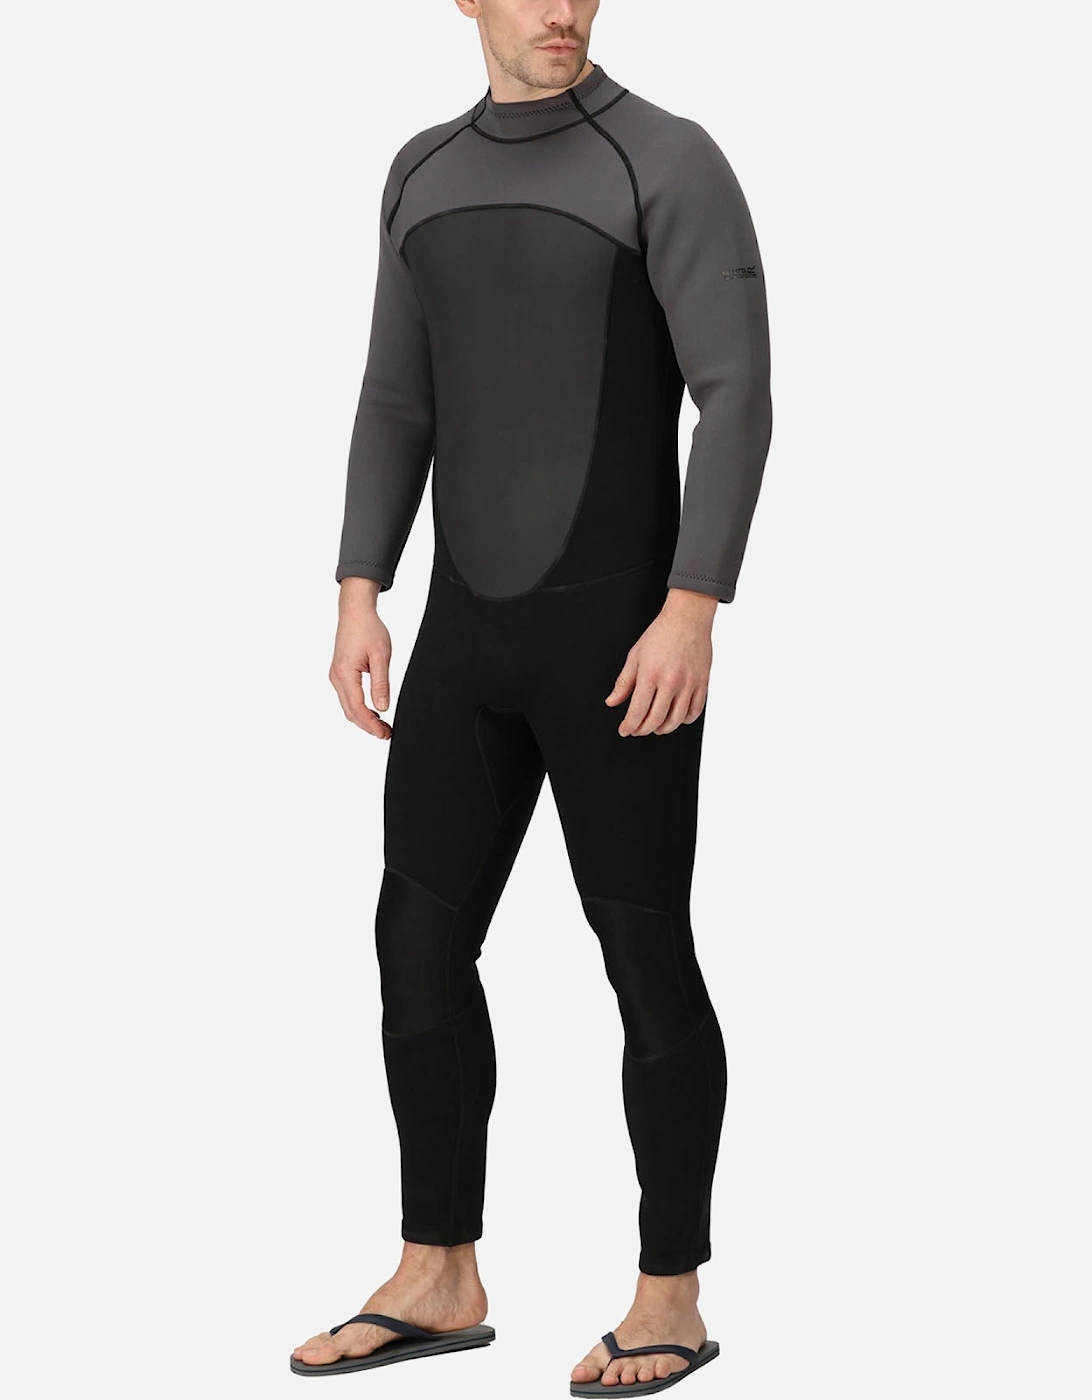 Mens Lightweight Quick Drying Full Wetsuit